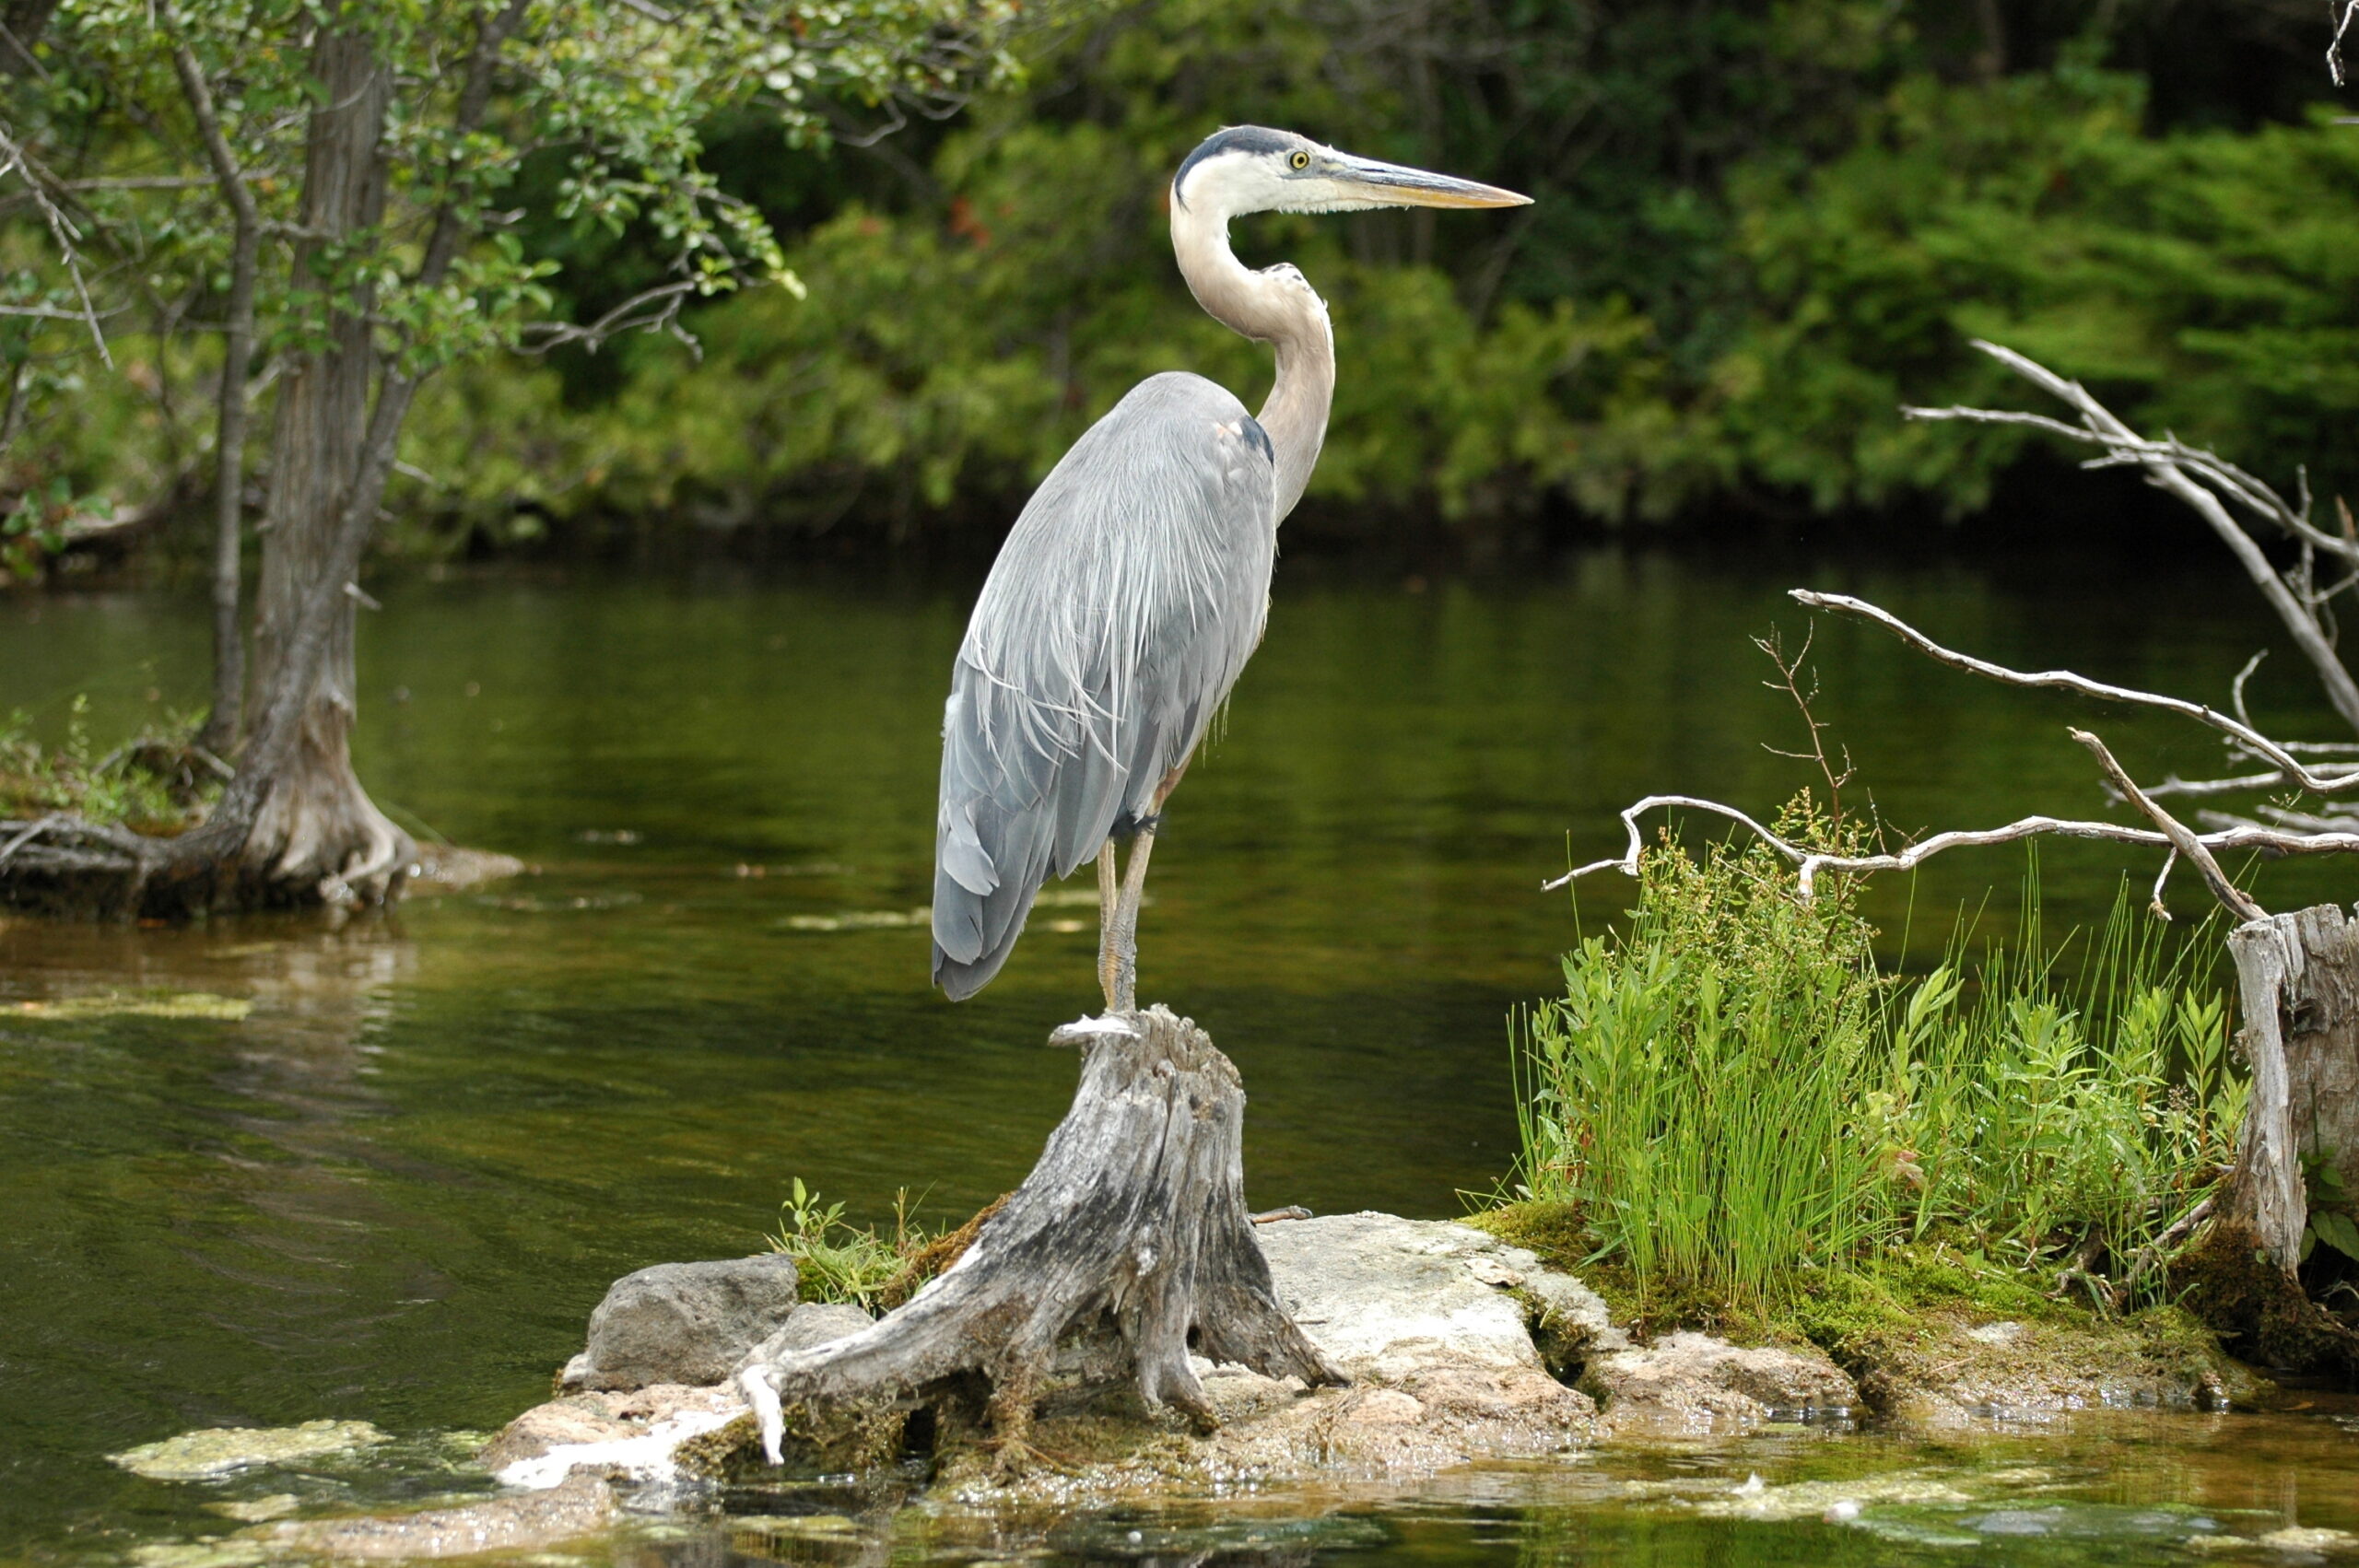 Explore Our 3-Day Nature and Wildlife Itinerary in Charleston